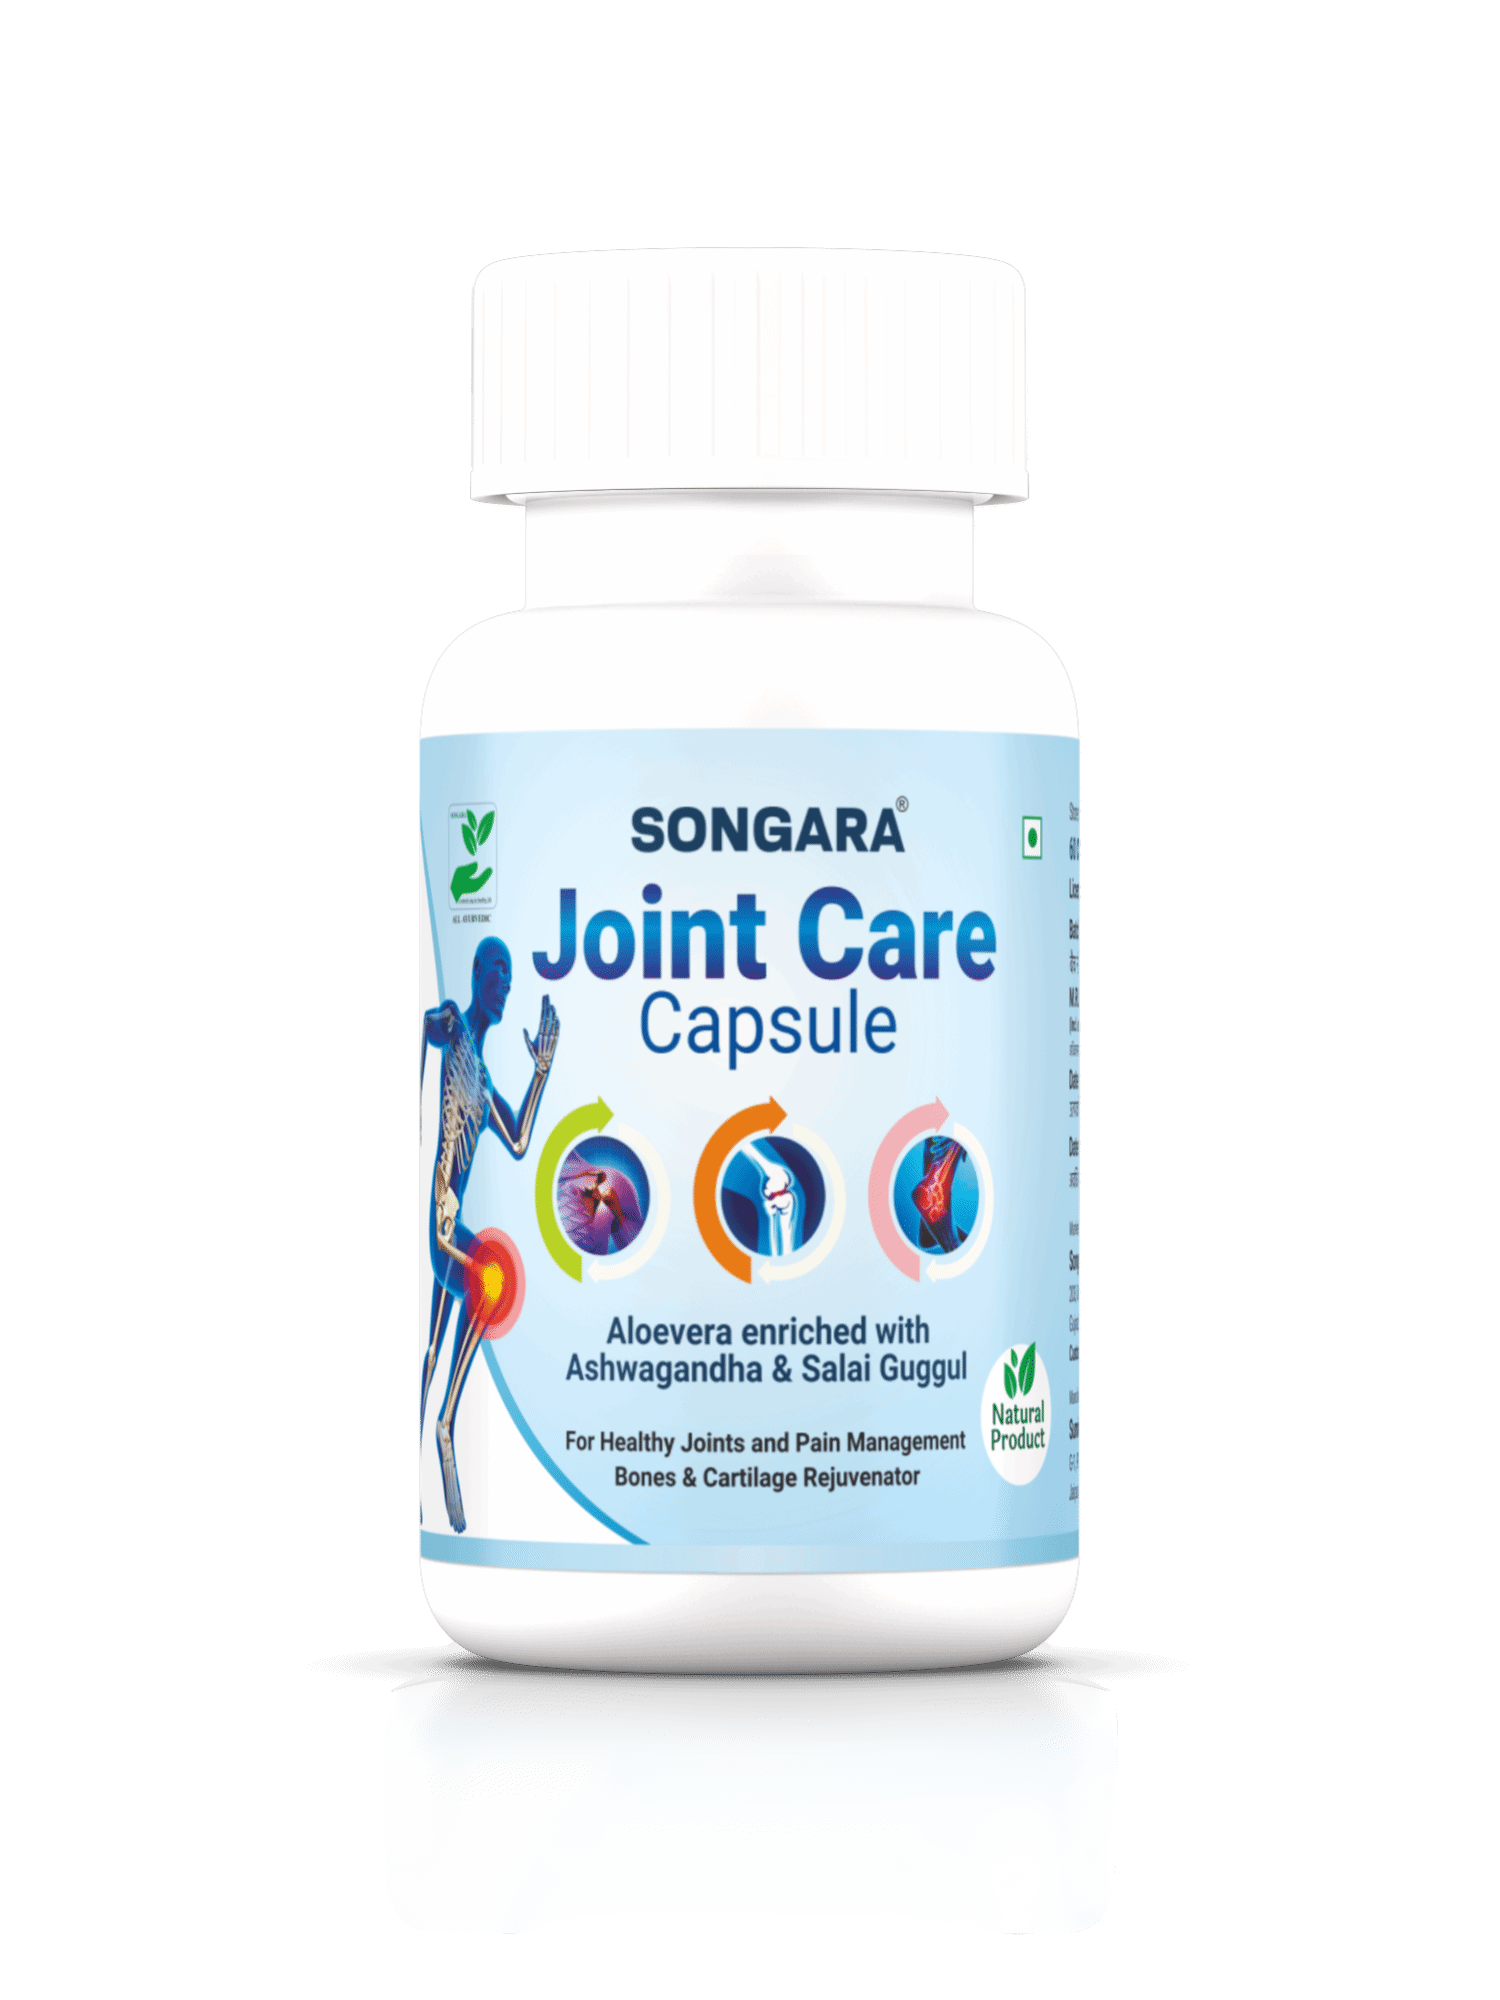 Songara Joints Care Capsules